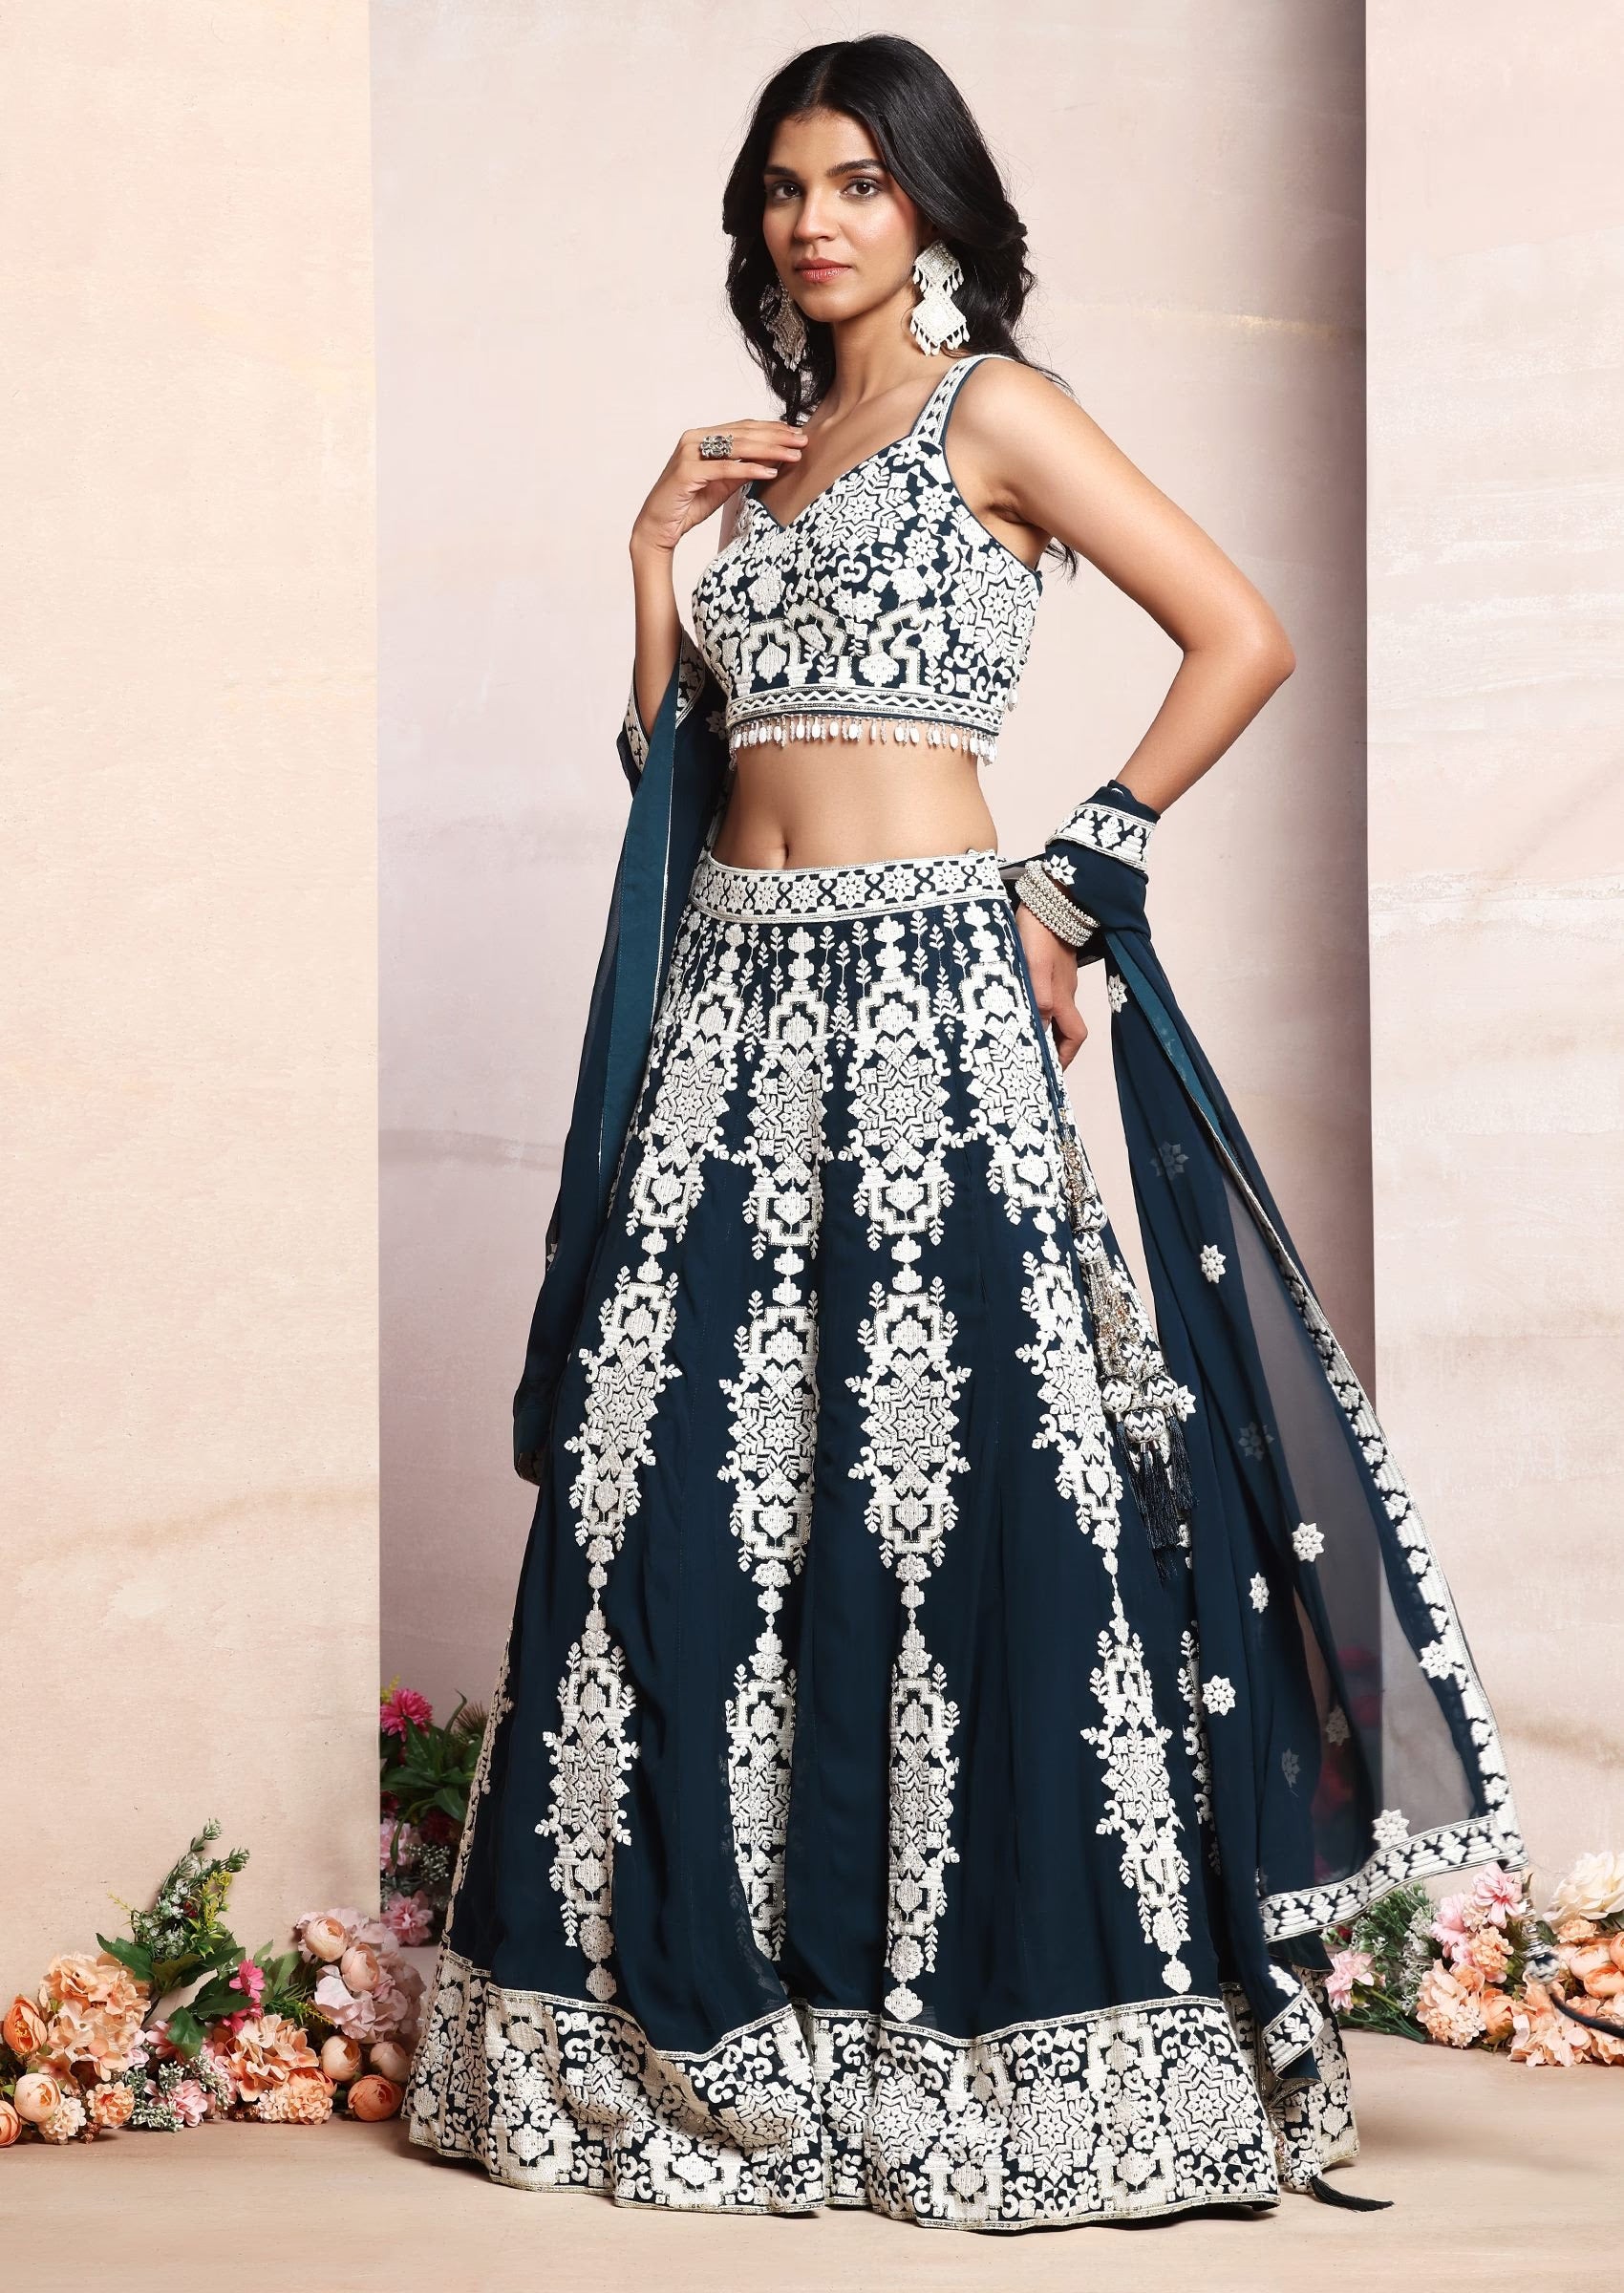 Security Check Required | Ethnic wear designer, Dress, Bridal collection